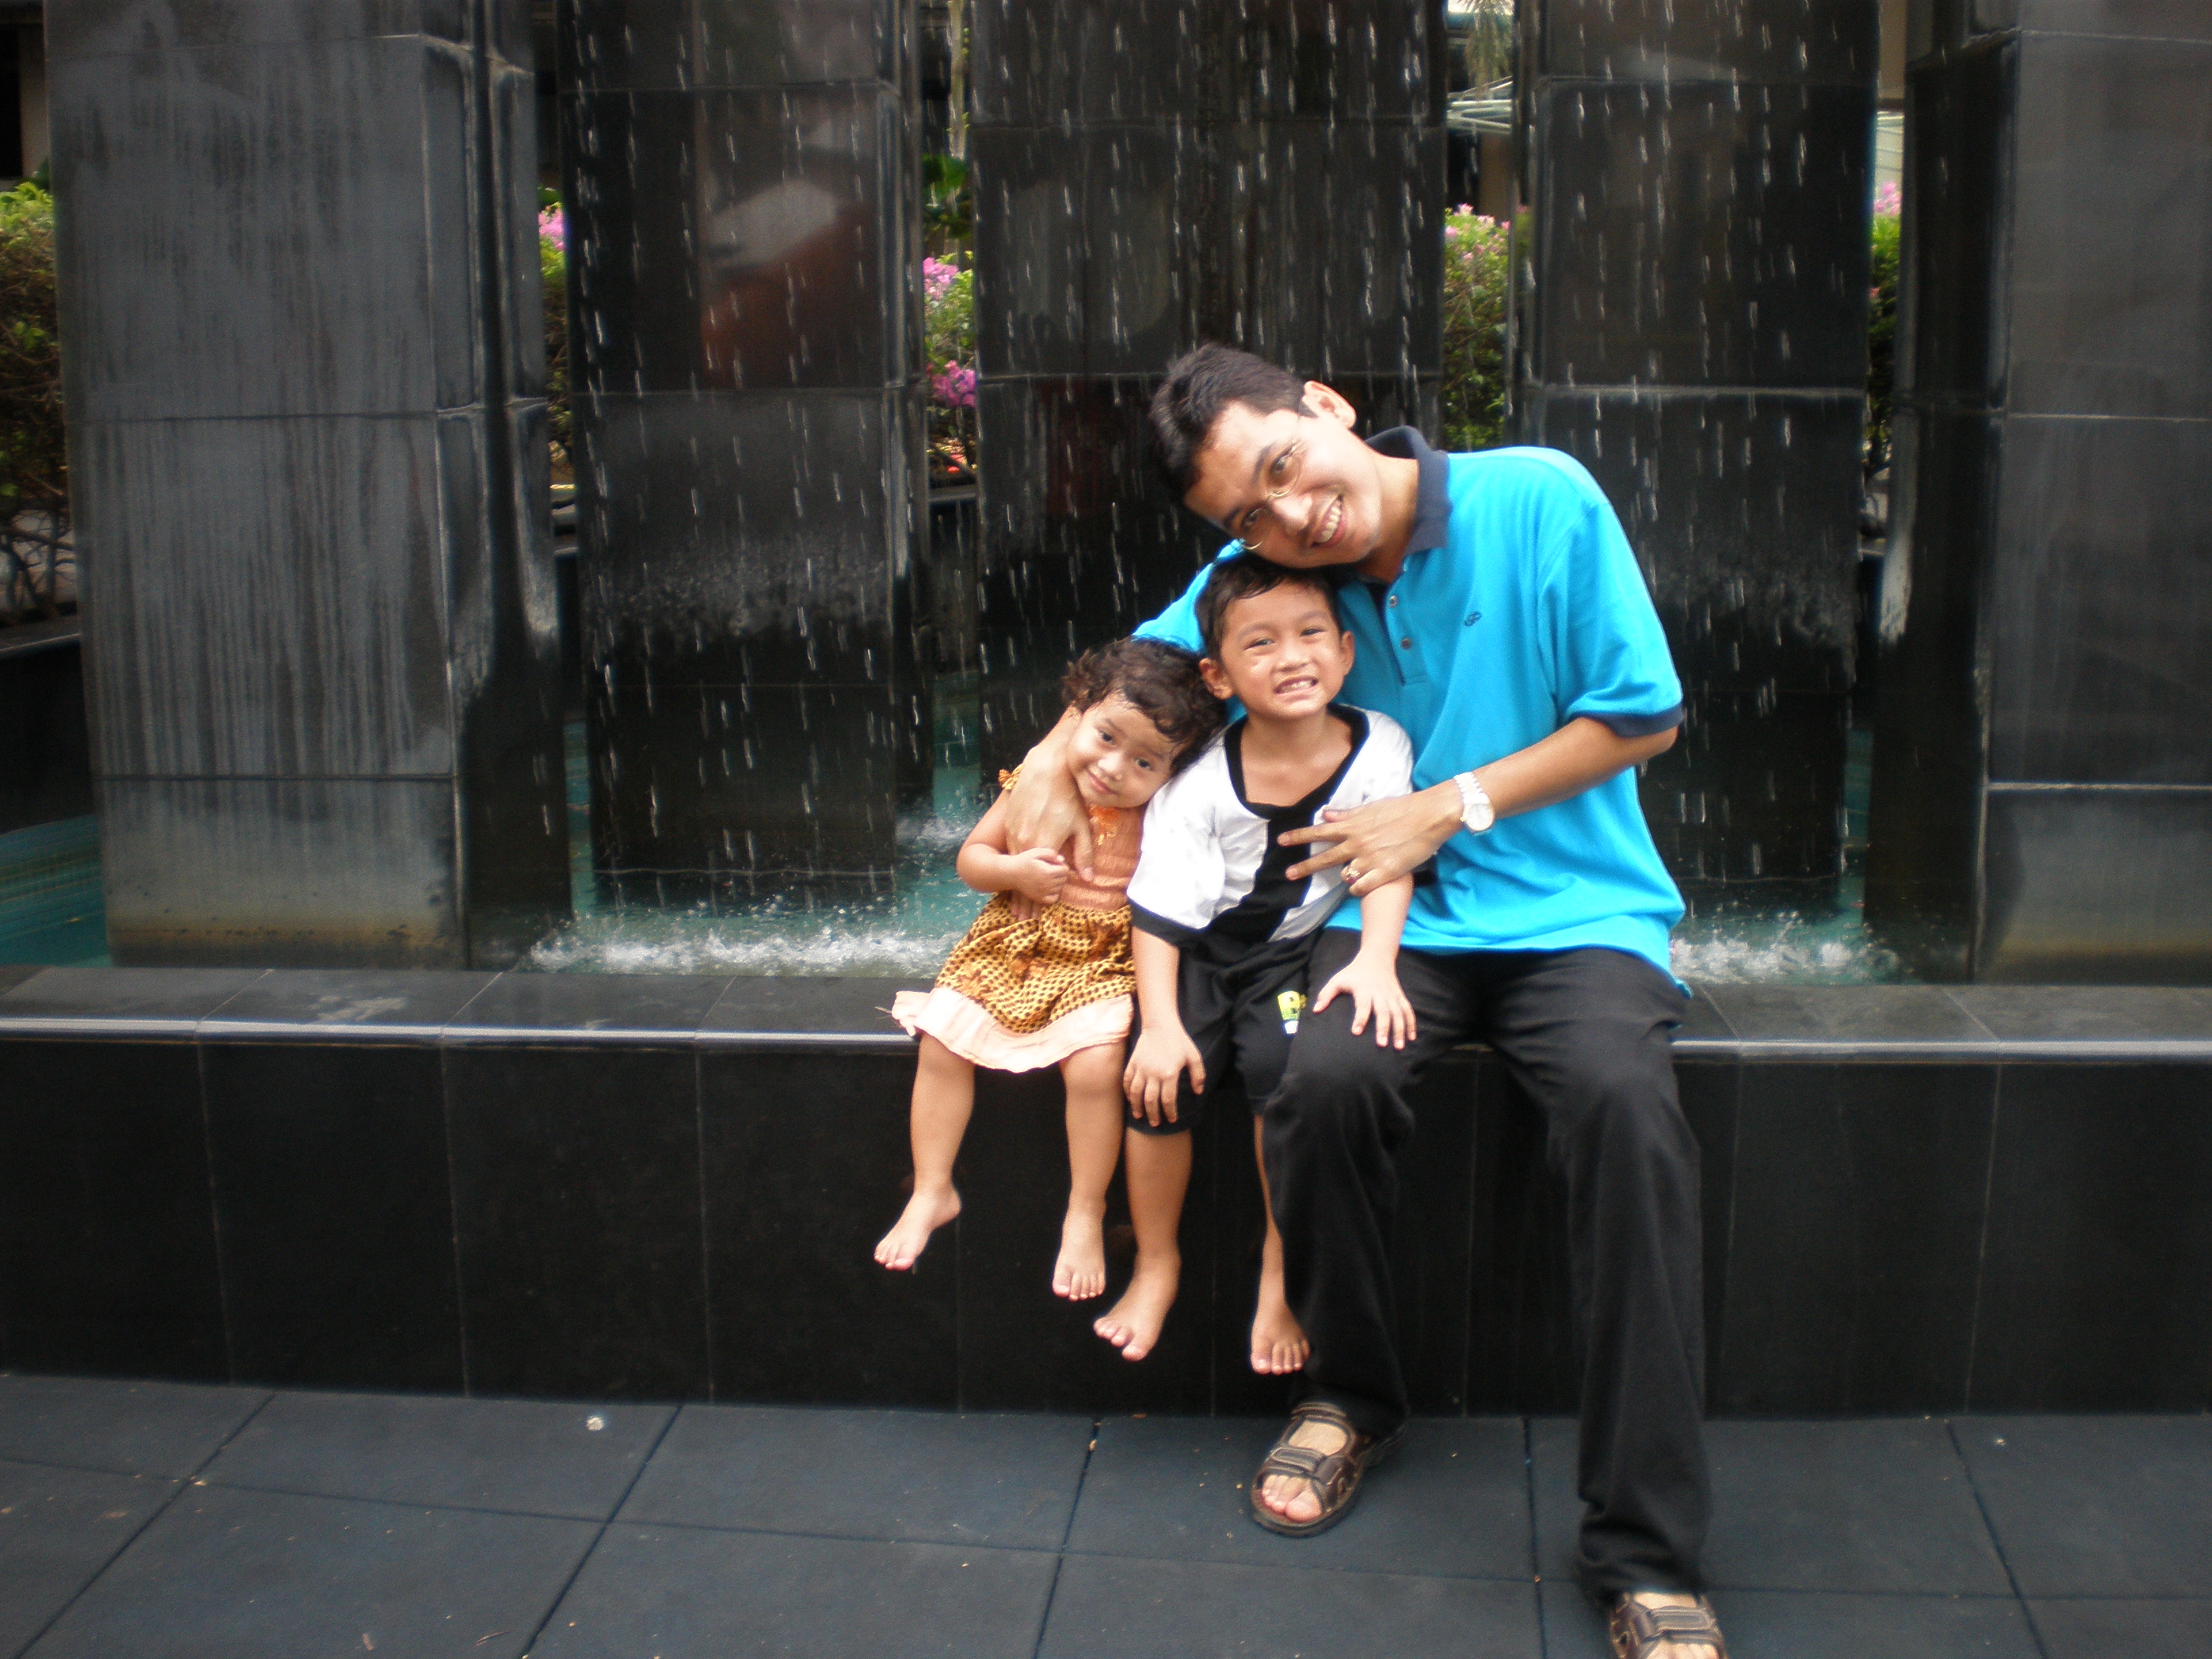 The reason Shahril had to hold them like that is because 1. They were afraid of the fountain kat belakang tu. :) 2. They wanted to run around some more.